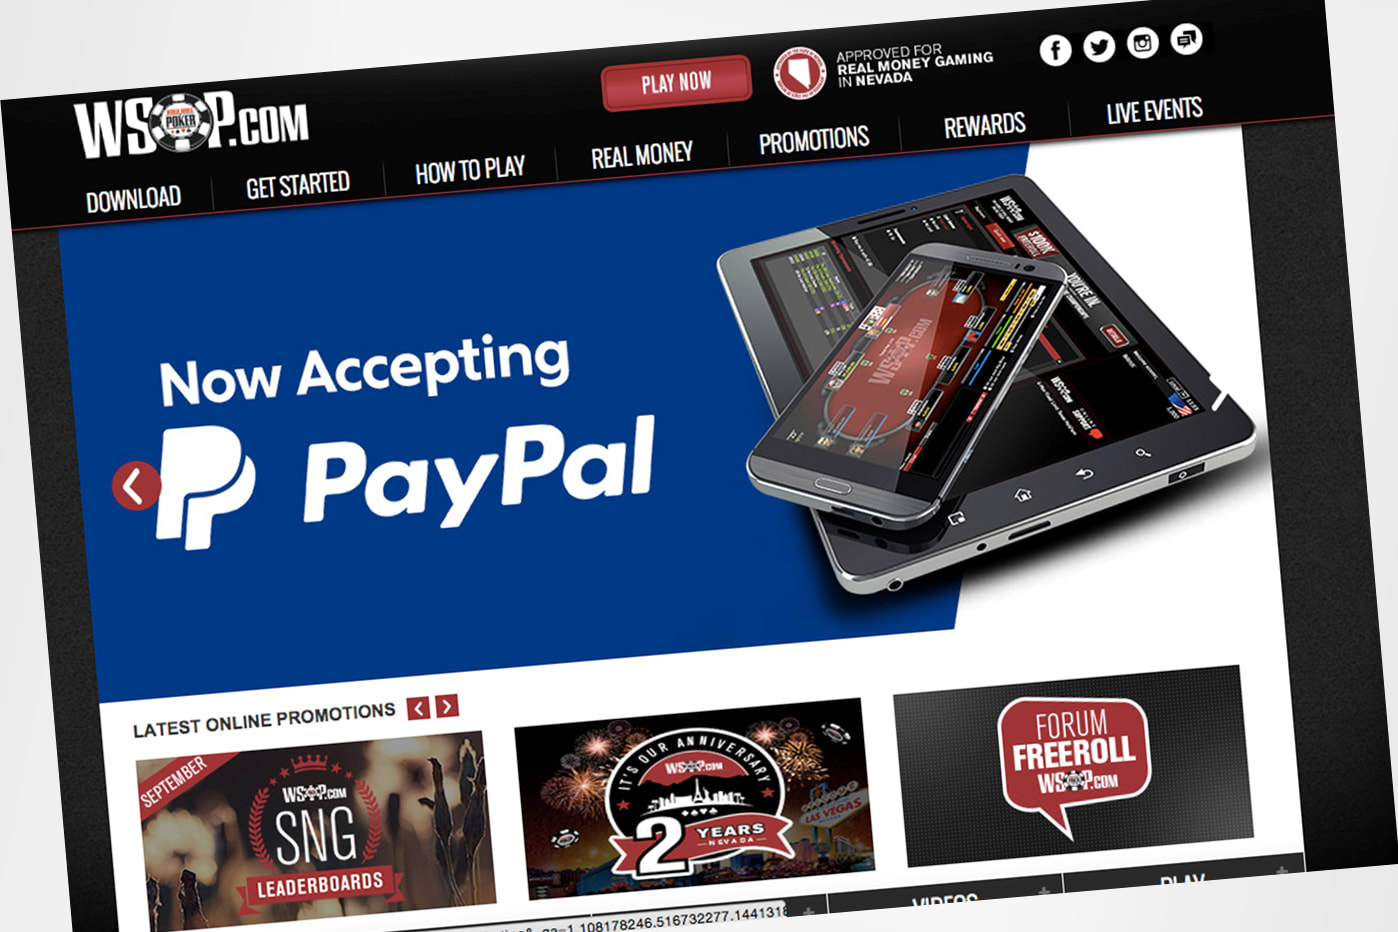 What Online Gambling Sites Accept Paypal